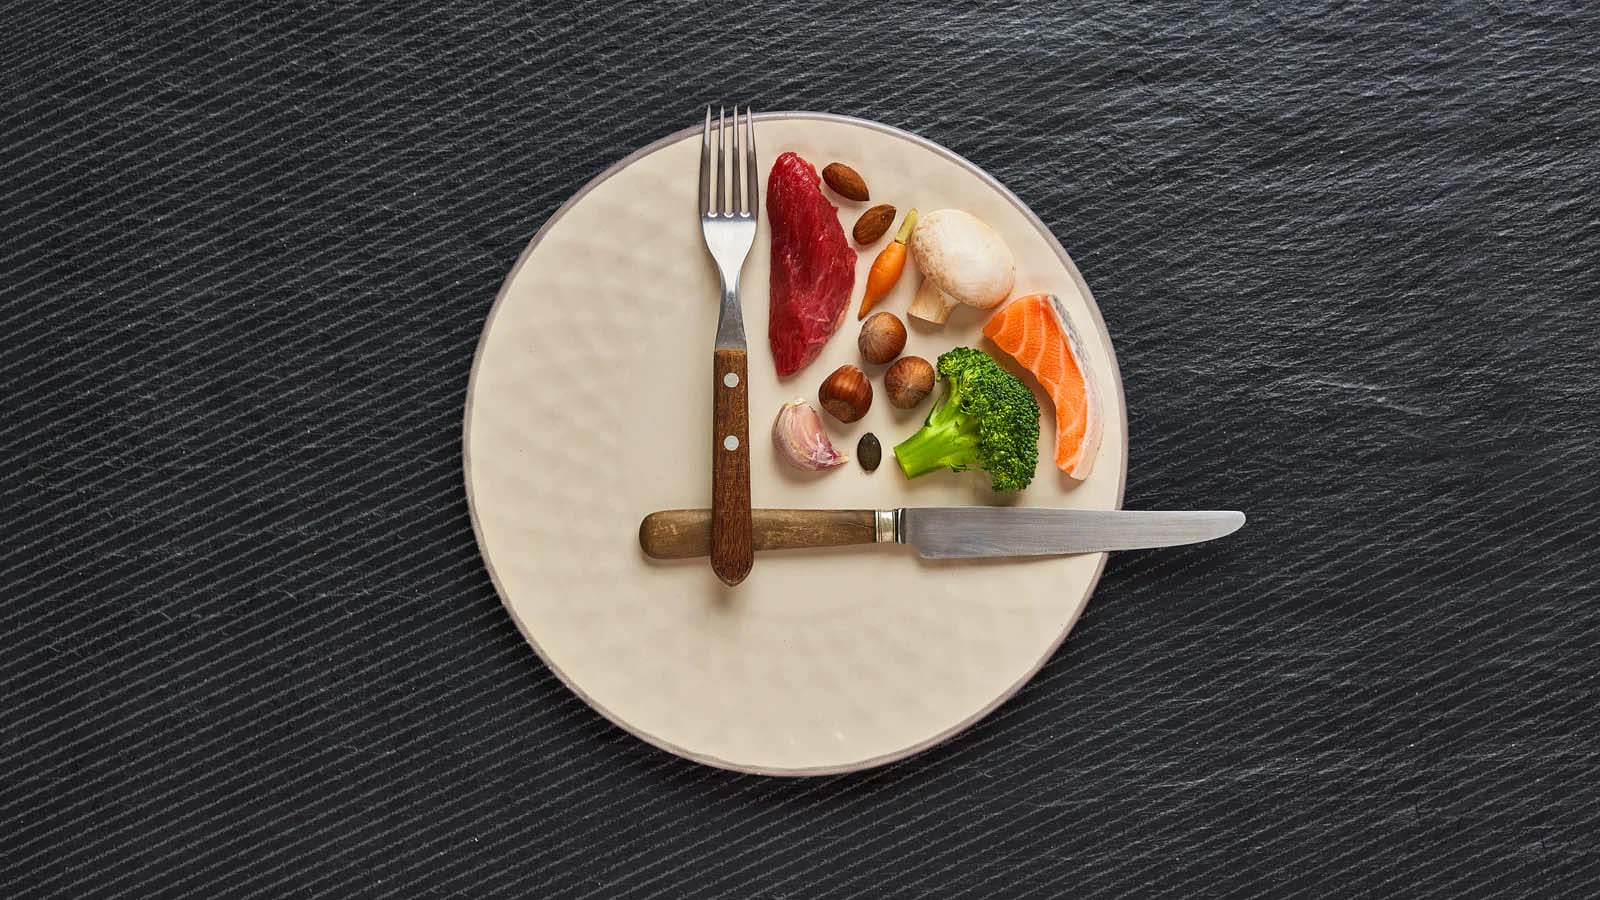 healthy food on a plate with fork and knife in clock position